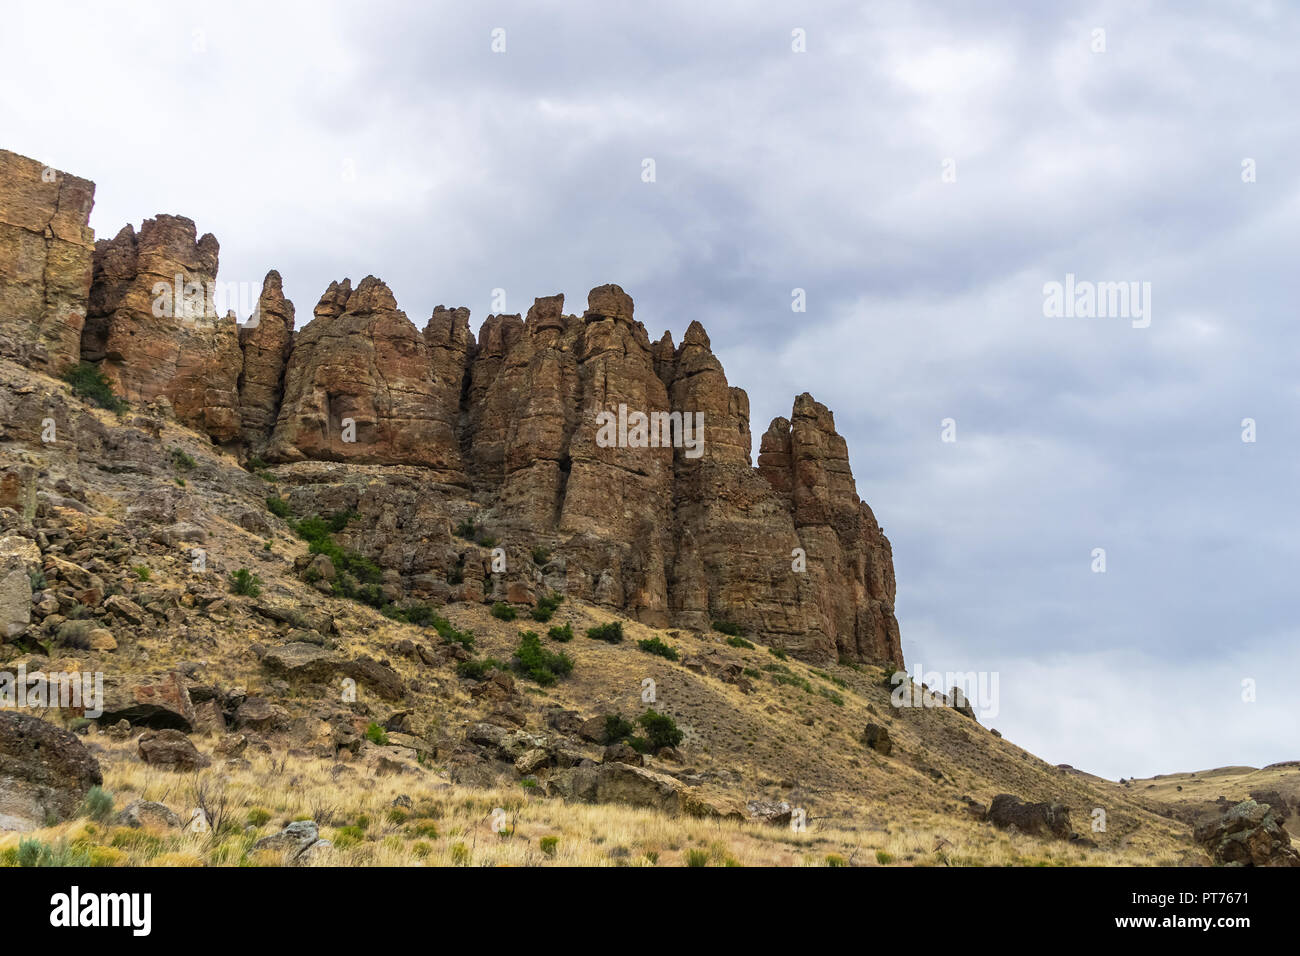 Die Palisades, prominente Relief der Clarno Maßeinheit des John Day Fossil Beds National Monument, Central Oregon, USA. Stockfoto